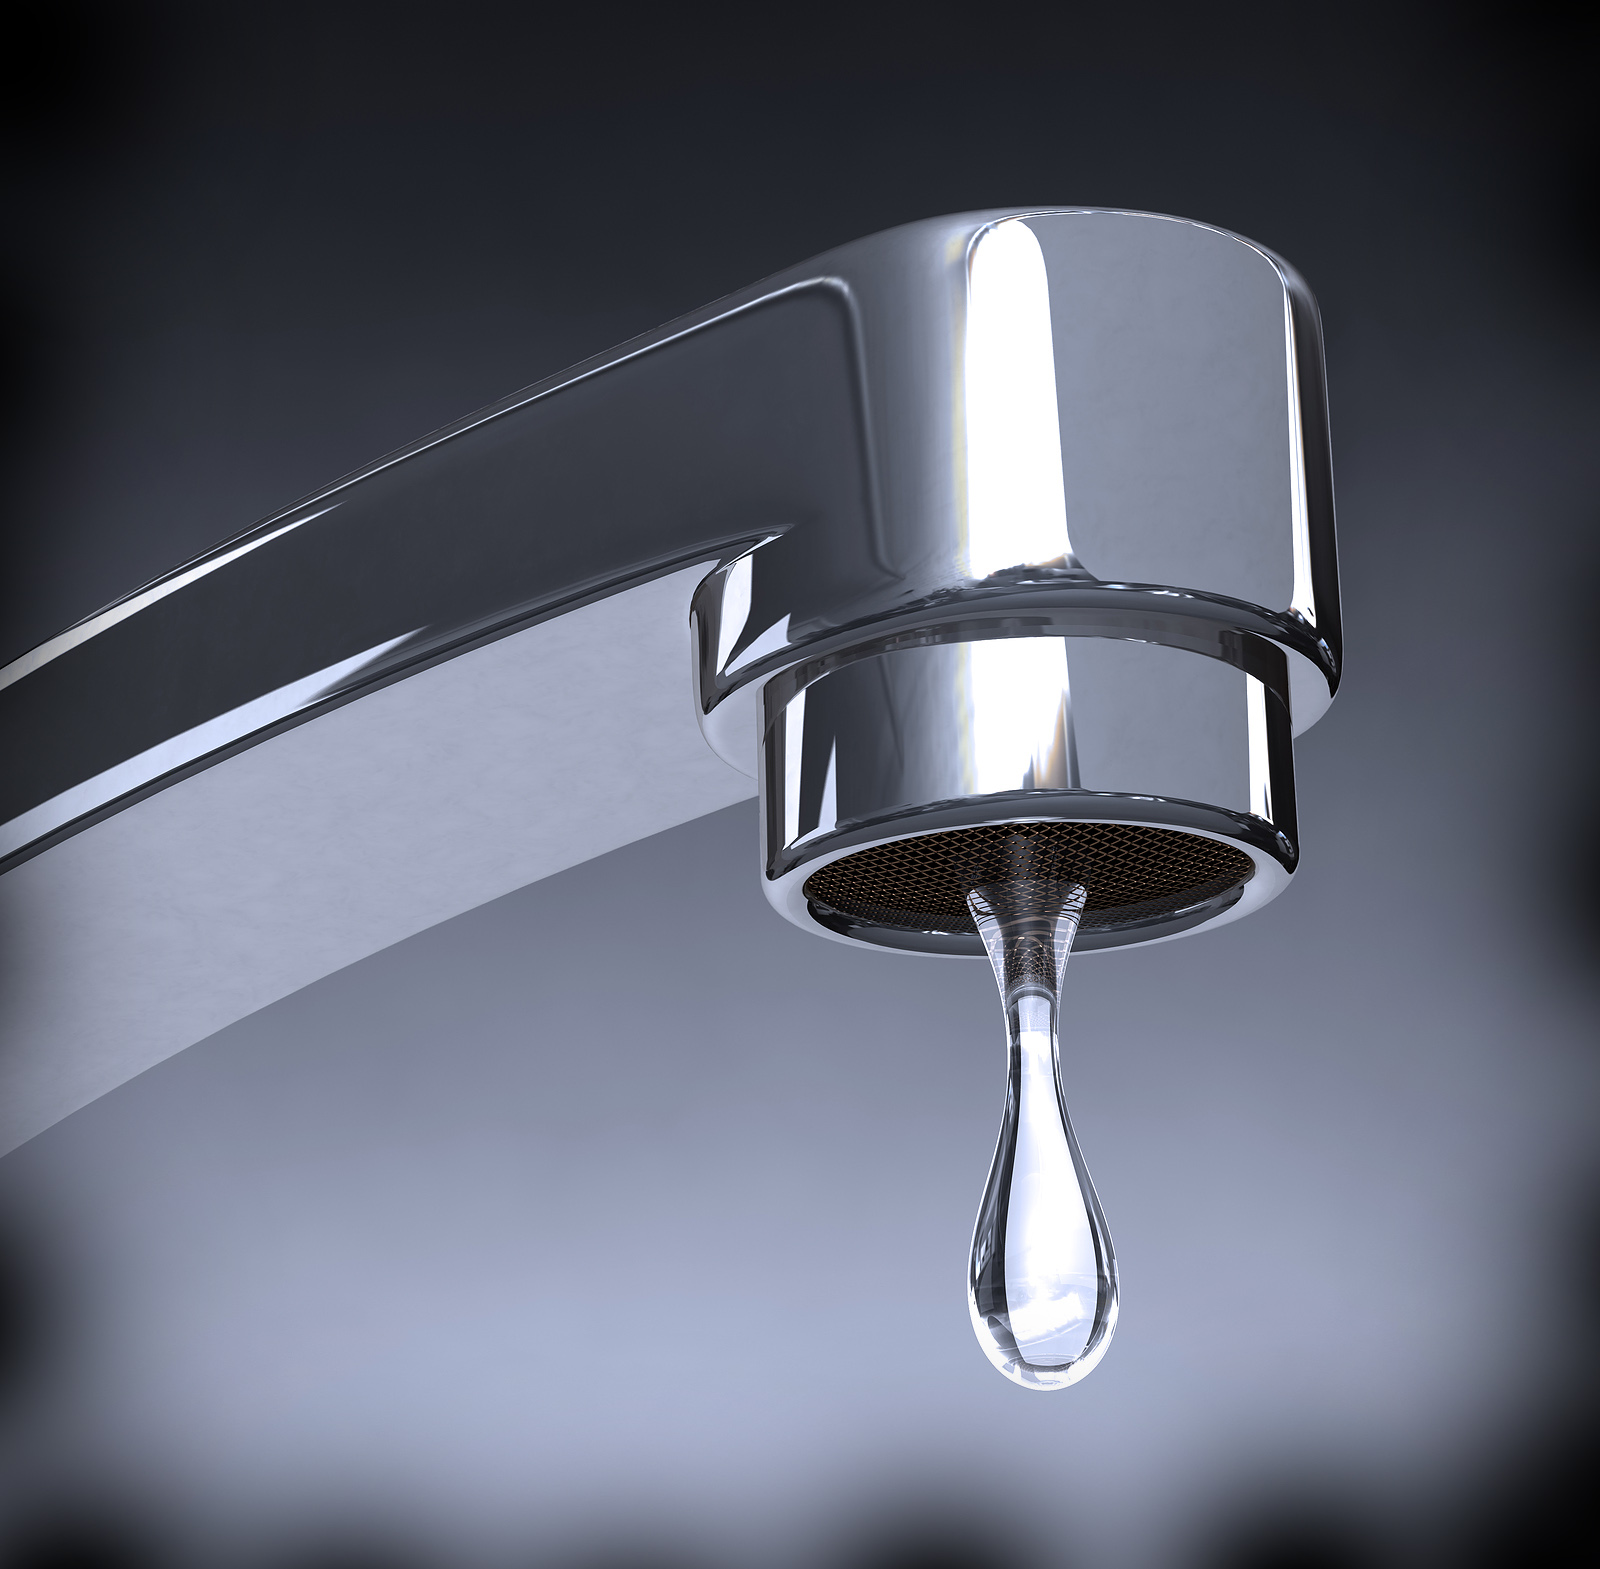 A water Shower Installation in Ampthill depicted by a photograph of a faucet with a droplet.